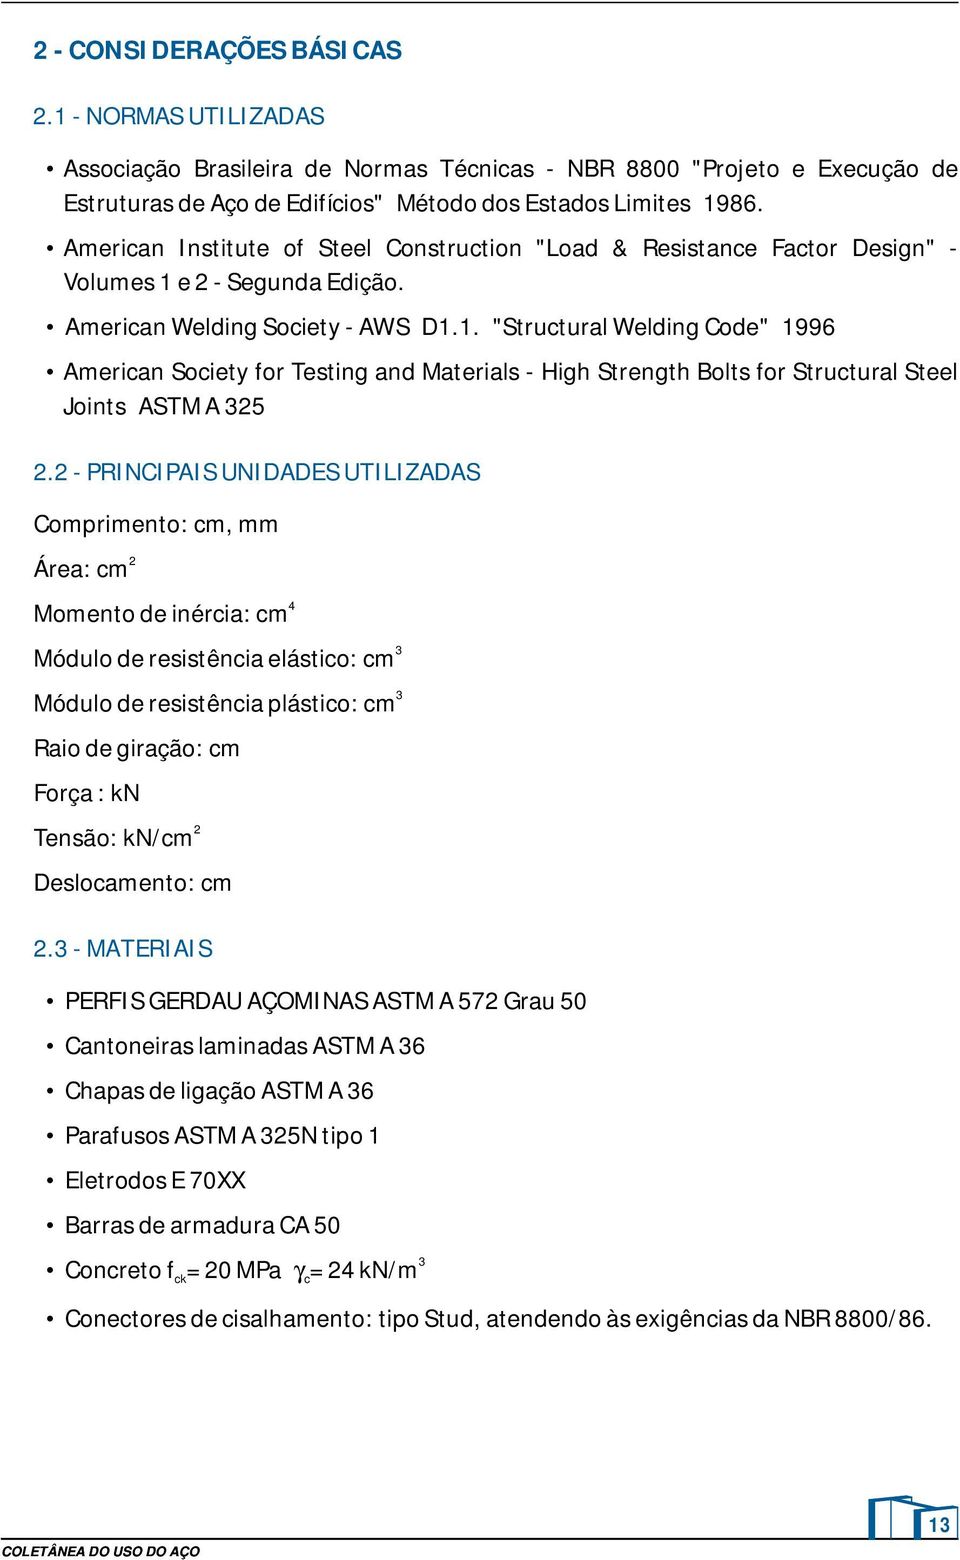 e 2 Seguna Eição. merican Weling Society WS D1.1. "Structural Weling Coe" 1996 merican Society for Testing an aterials High Strength Bolts for Structural Steel Joints ST 325 2.